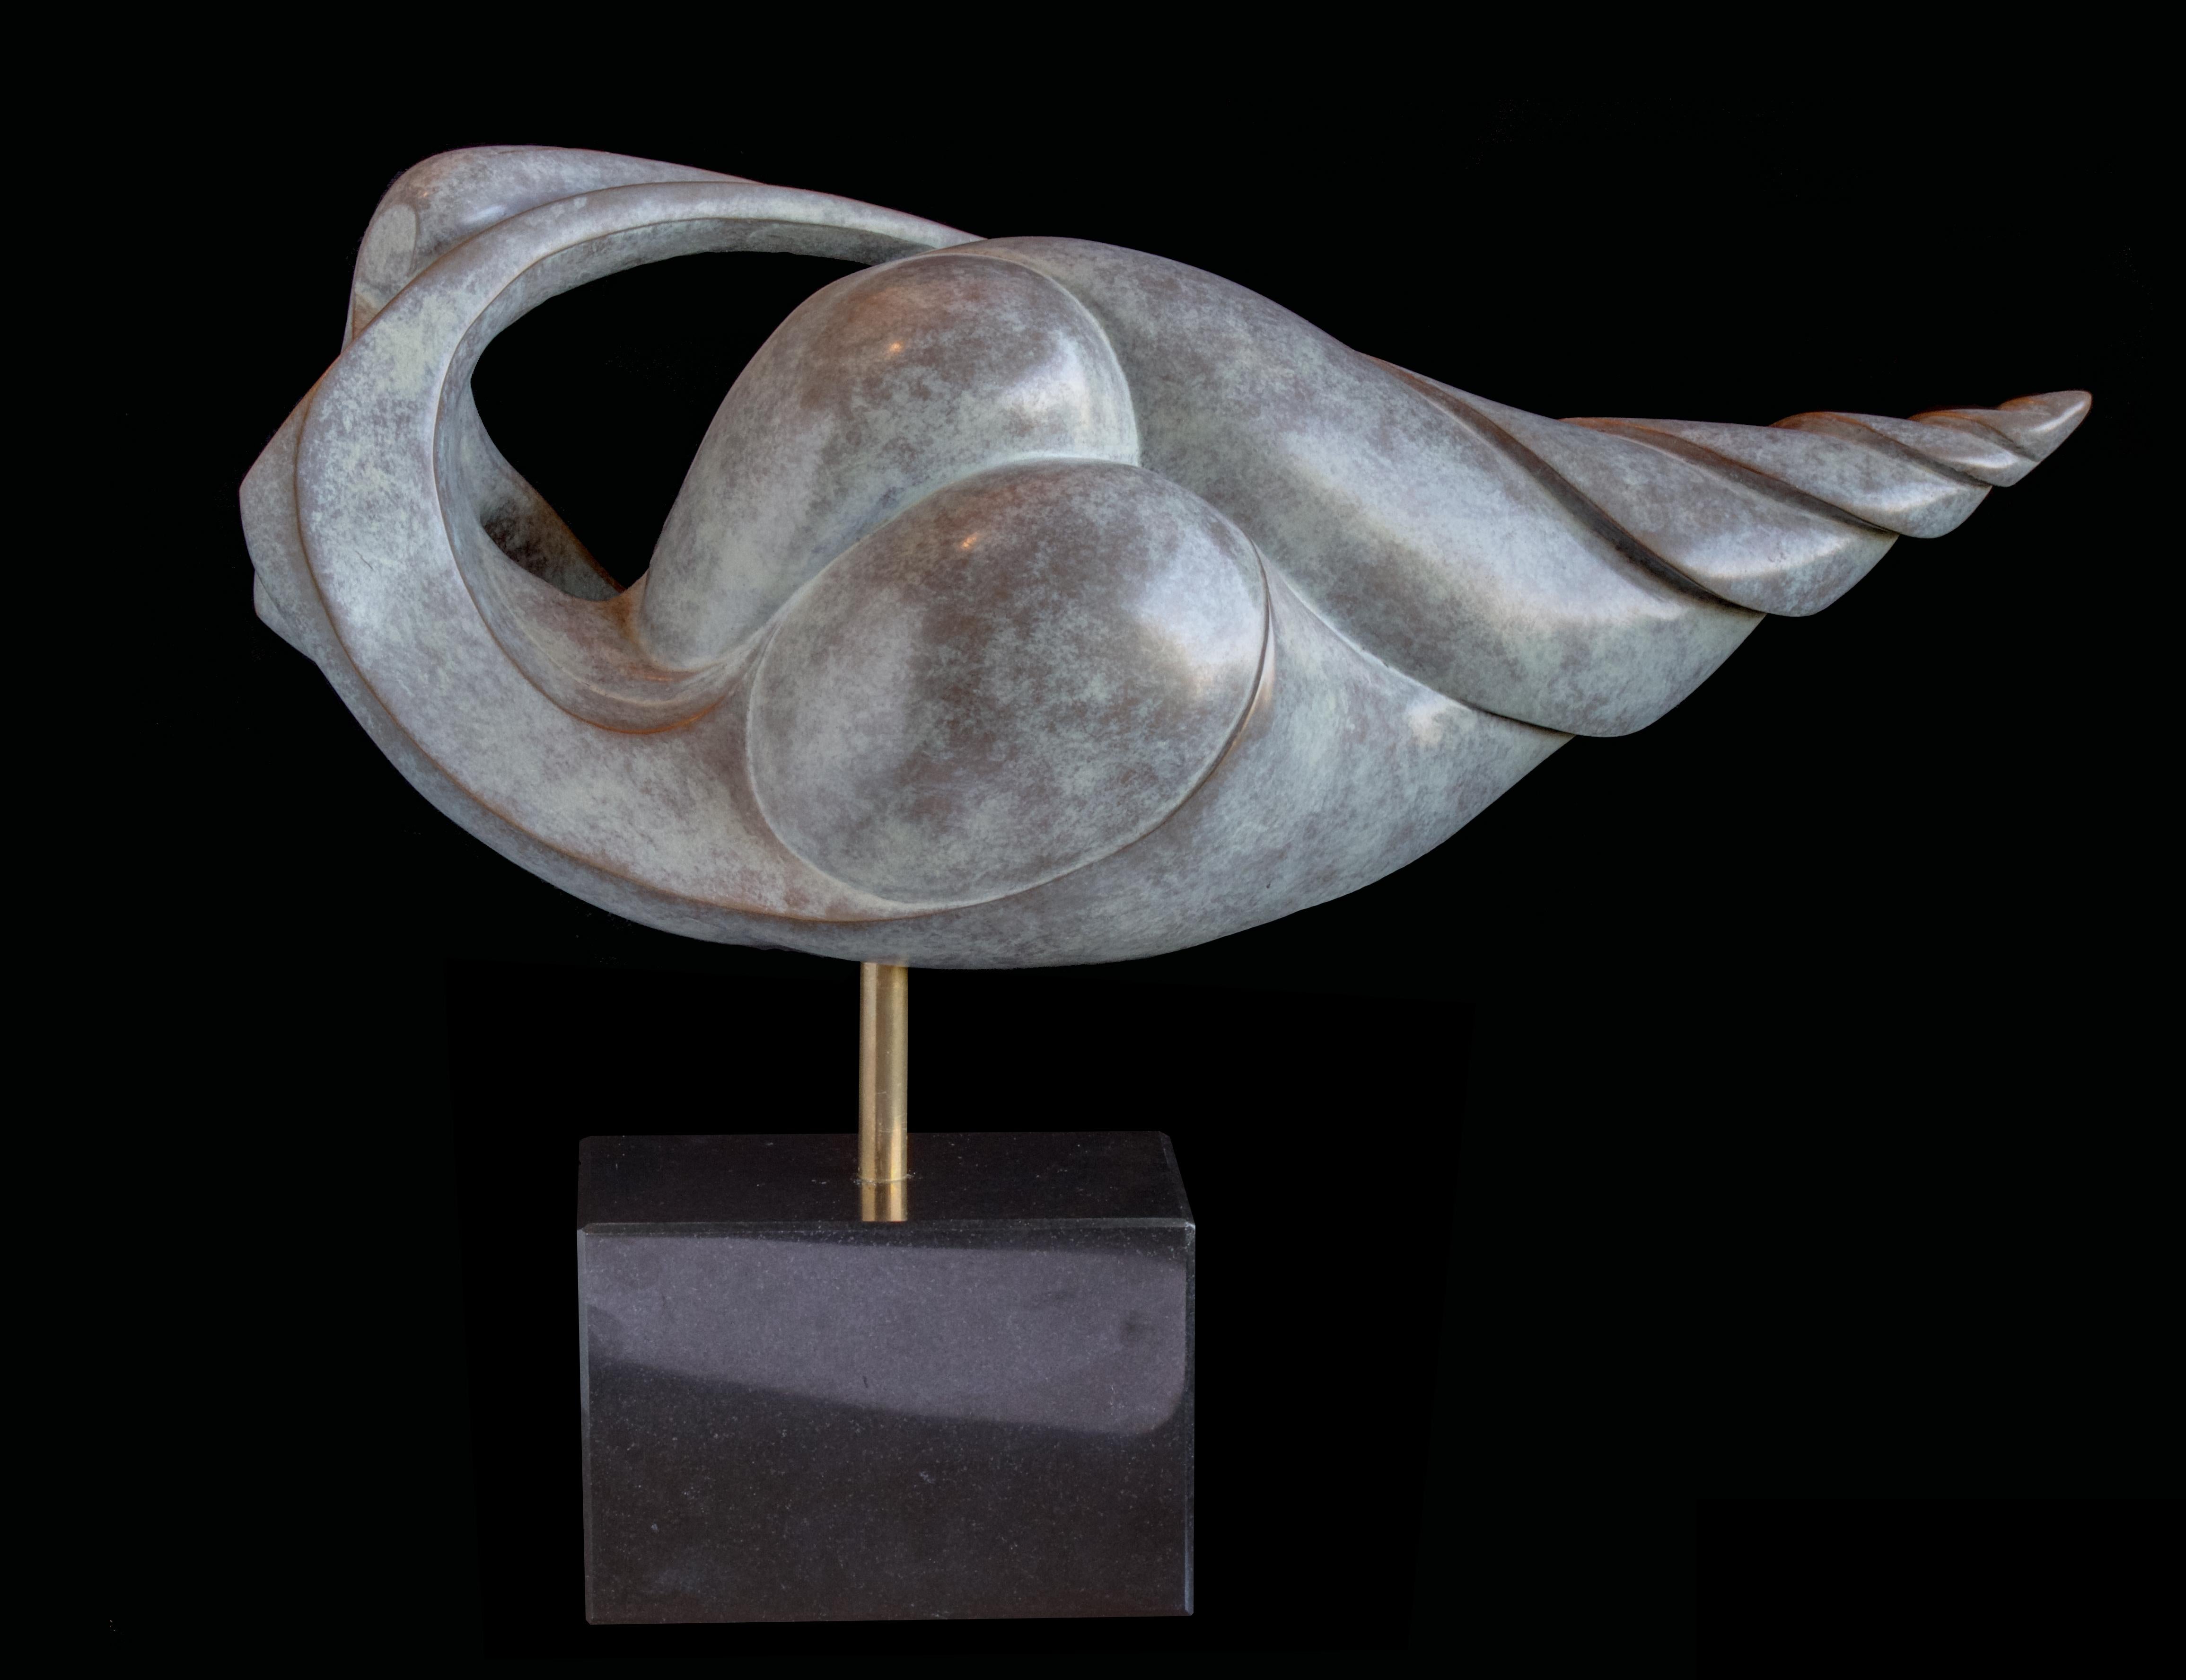 Isabelle Jeandot Nude Sculpture - "The Mermaid", Semi-Abstract Shell-Shaped Figurative Bronze Sculpture